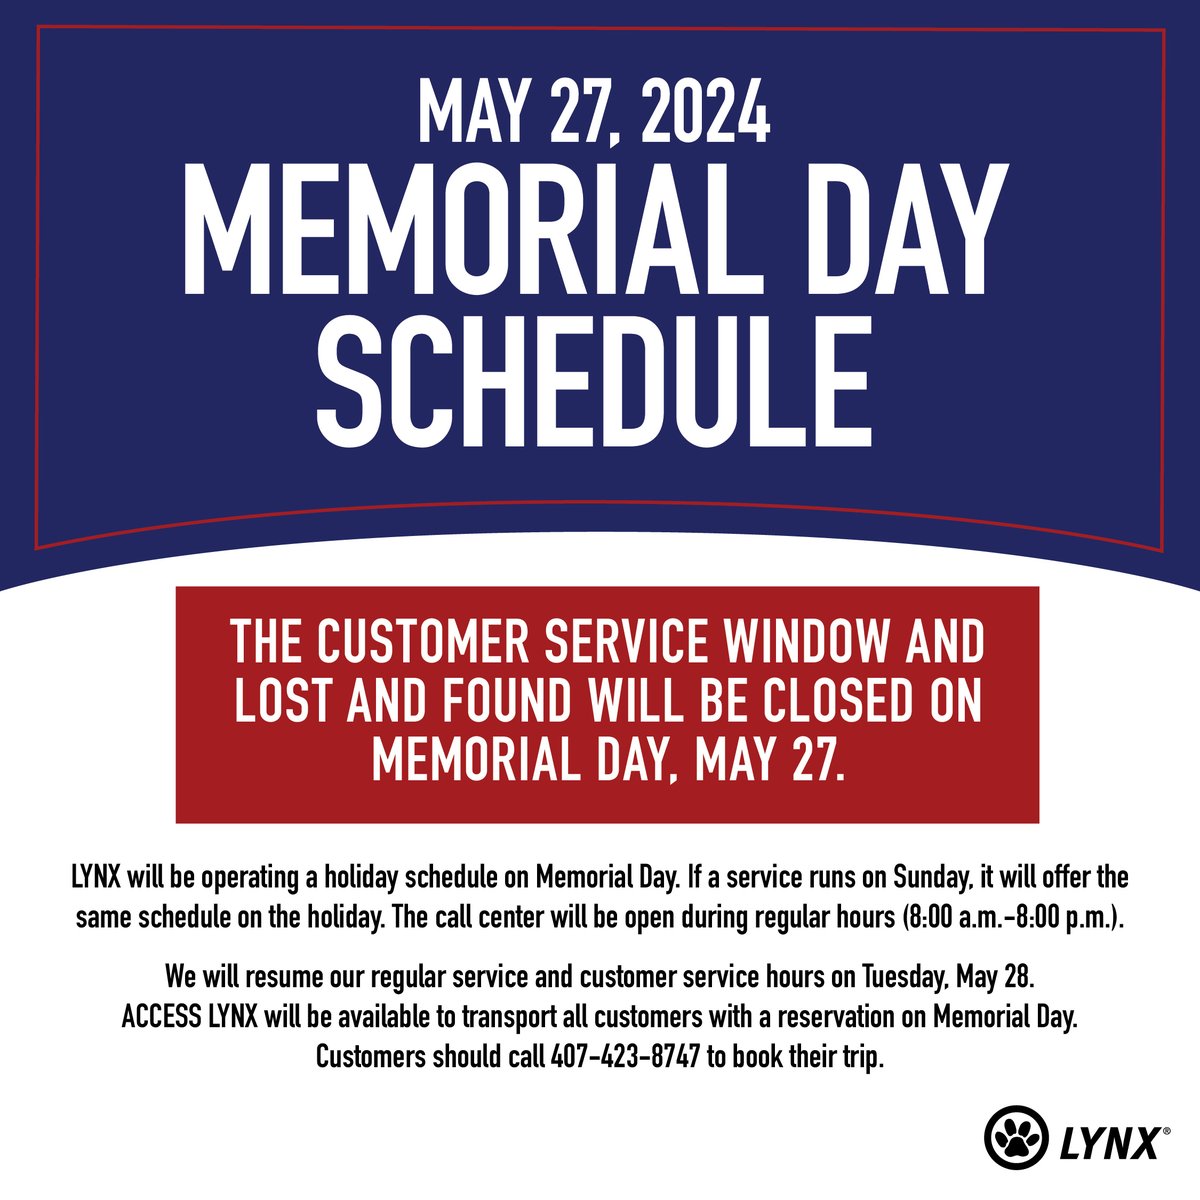 We will be operating a Sunday schedule on Memorial Day. Customer Service Window & Lost and Found will be closed. Call center open 8a-8p. Normal service & customer service hours resume May 28. ACCESS LYNX will transport customers with a reservation on Memorial Day.